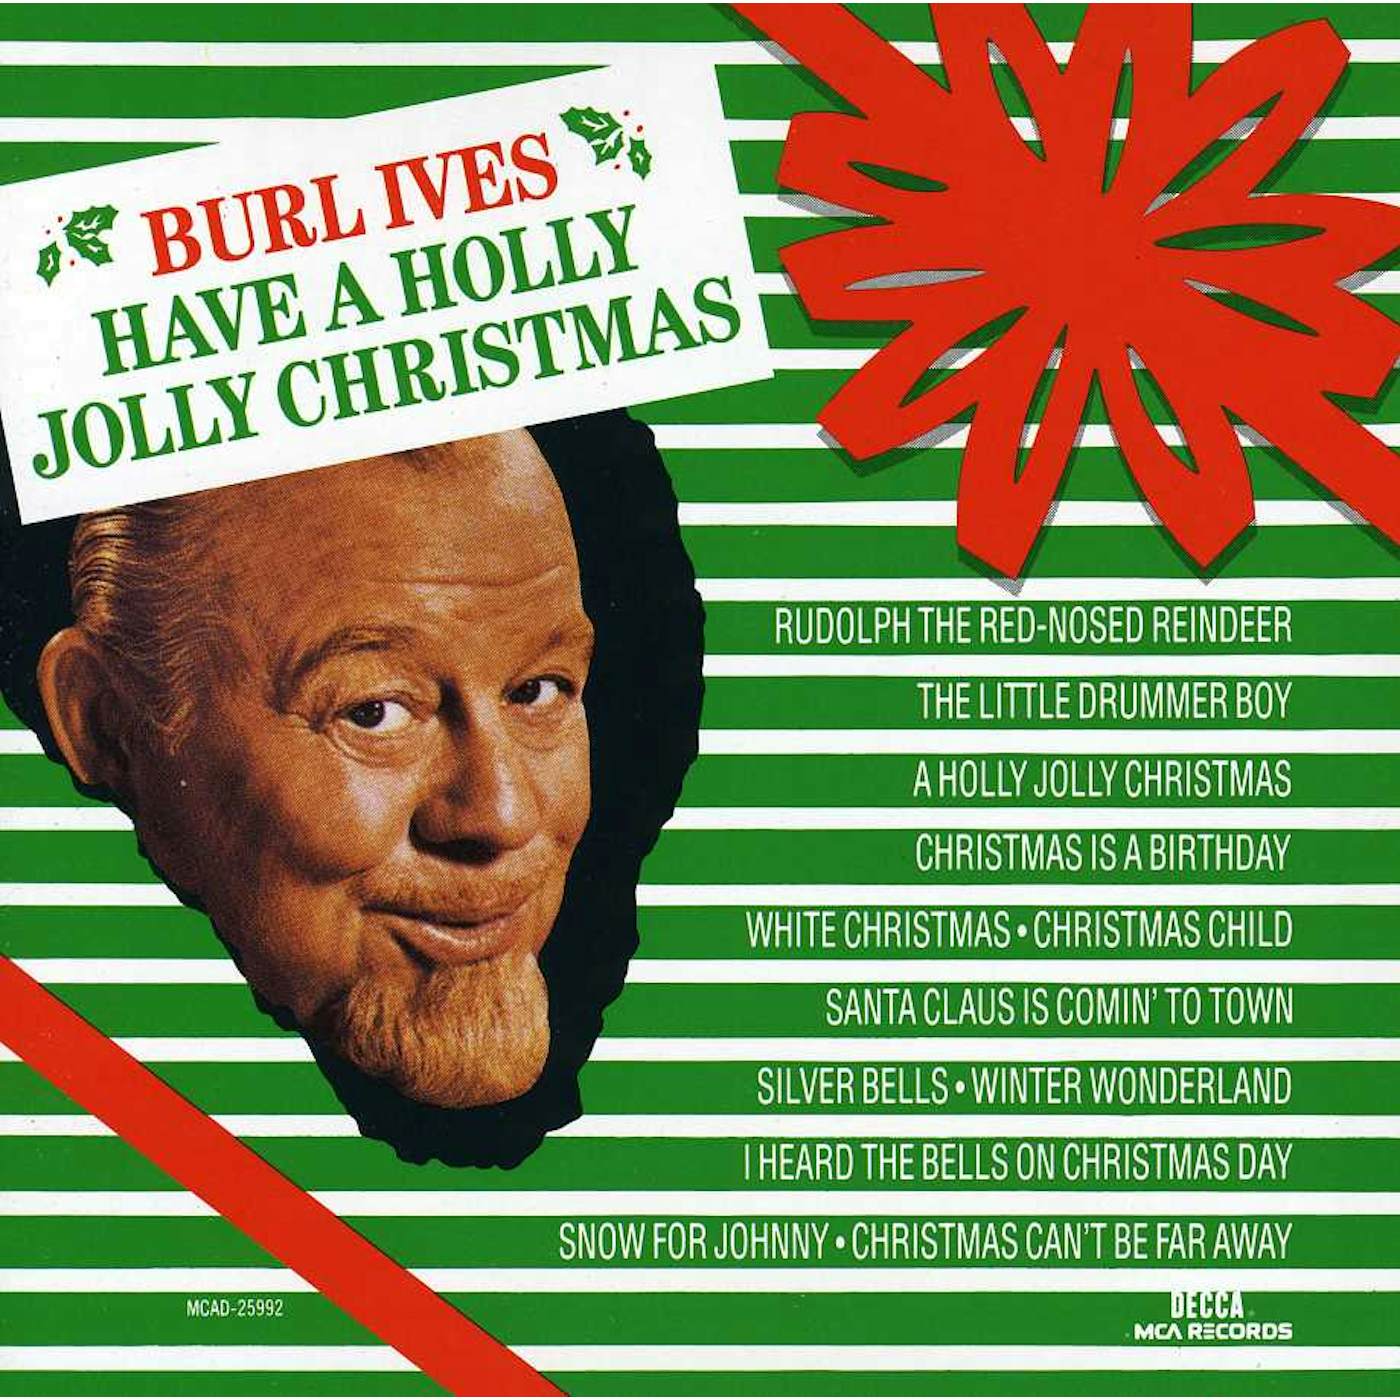 Burl Ives HAVE A HOLLY JOLLY CHRISTMAS CD